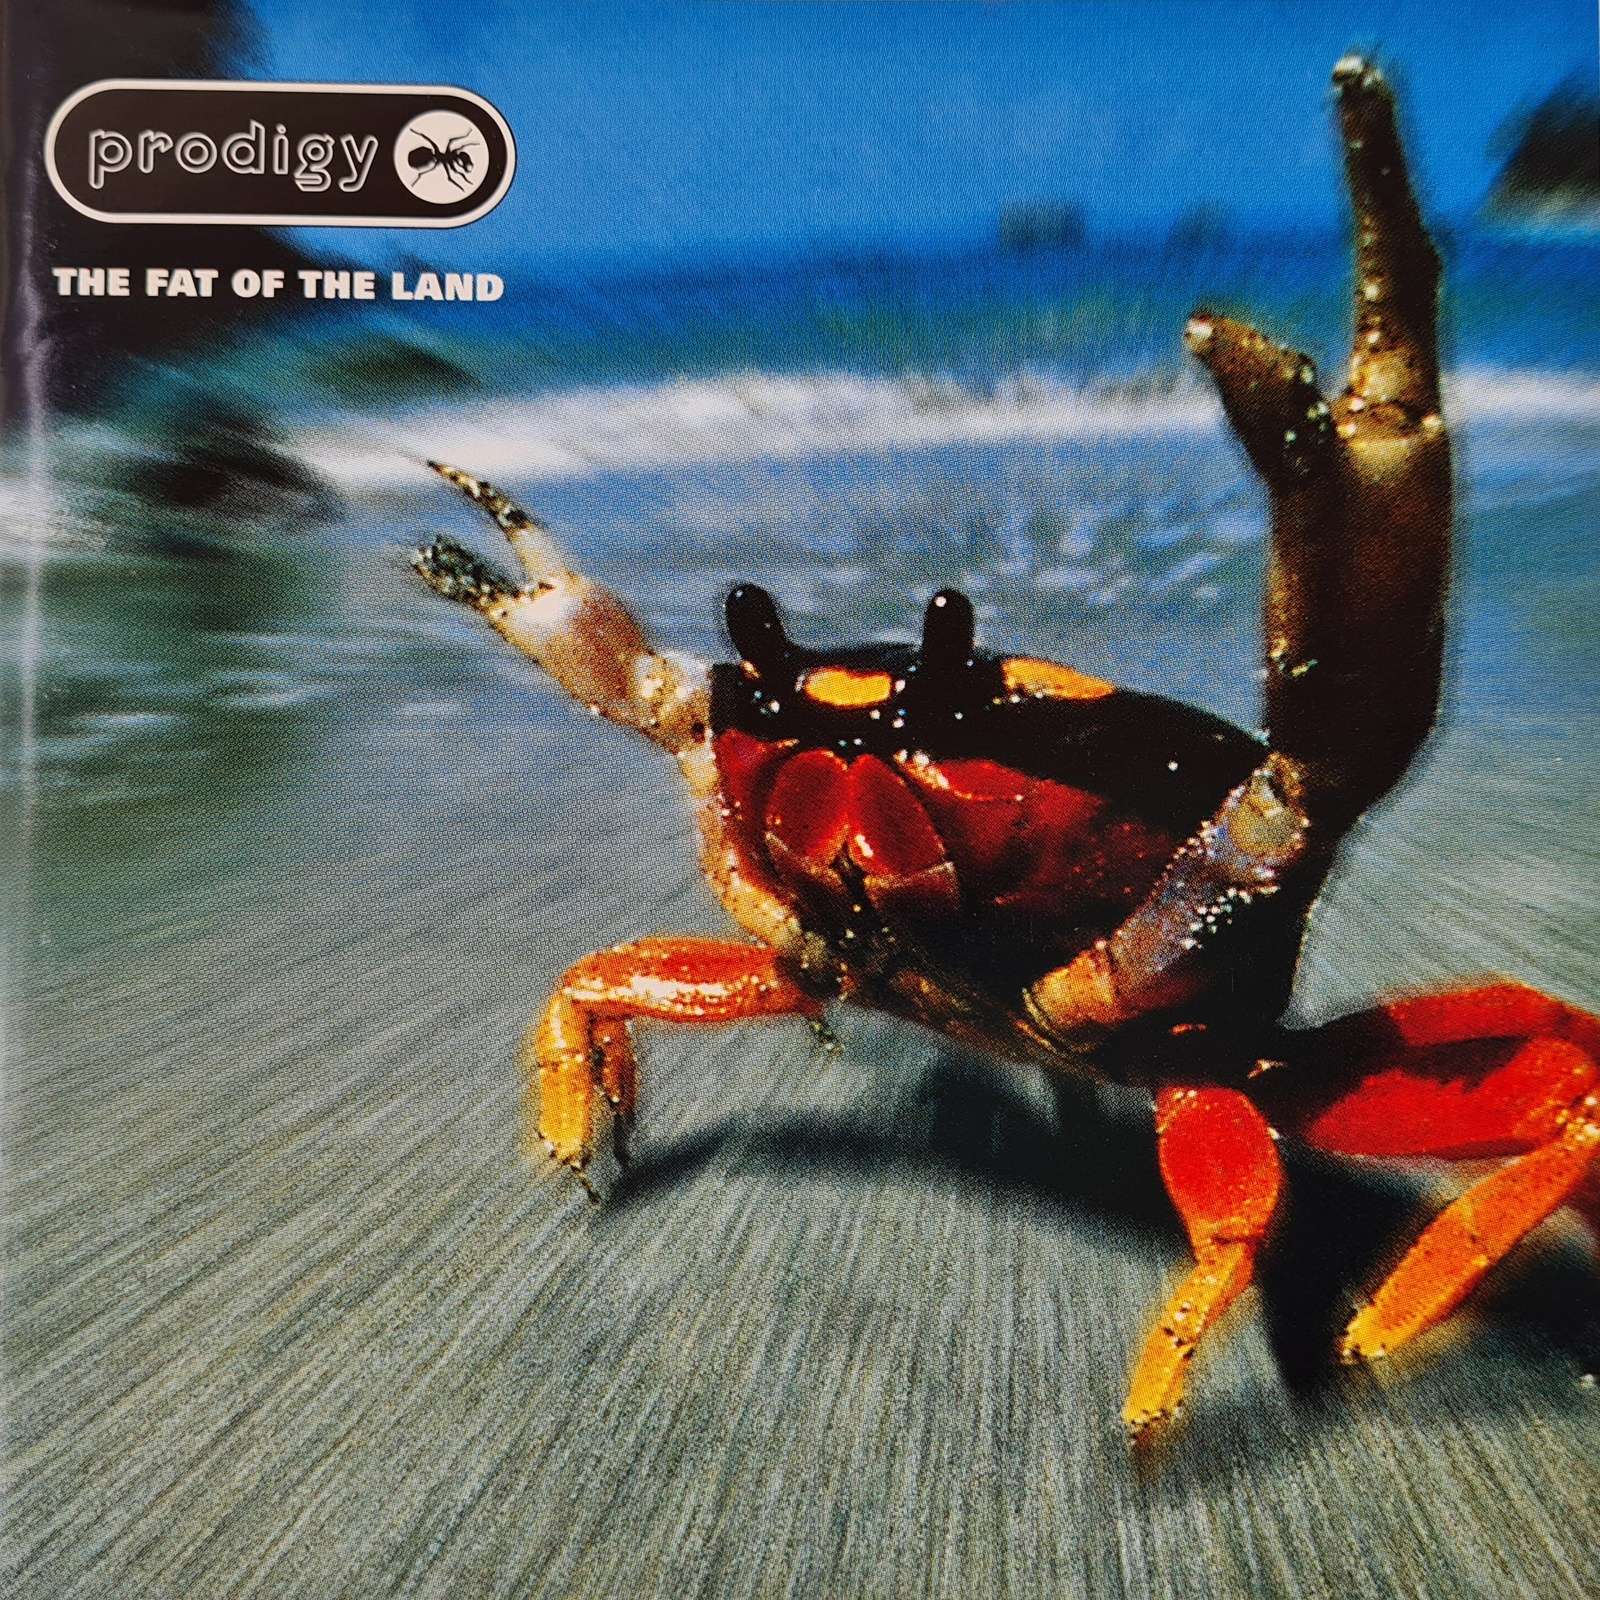 Prodigy - The Fat of the Land (CD)